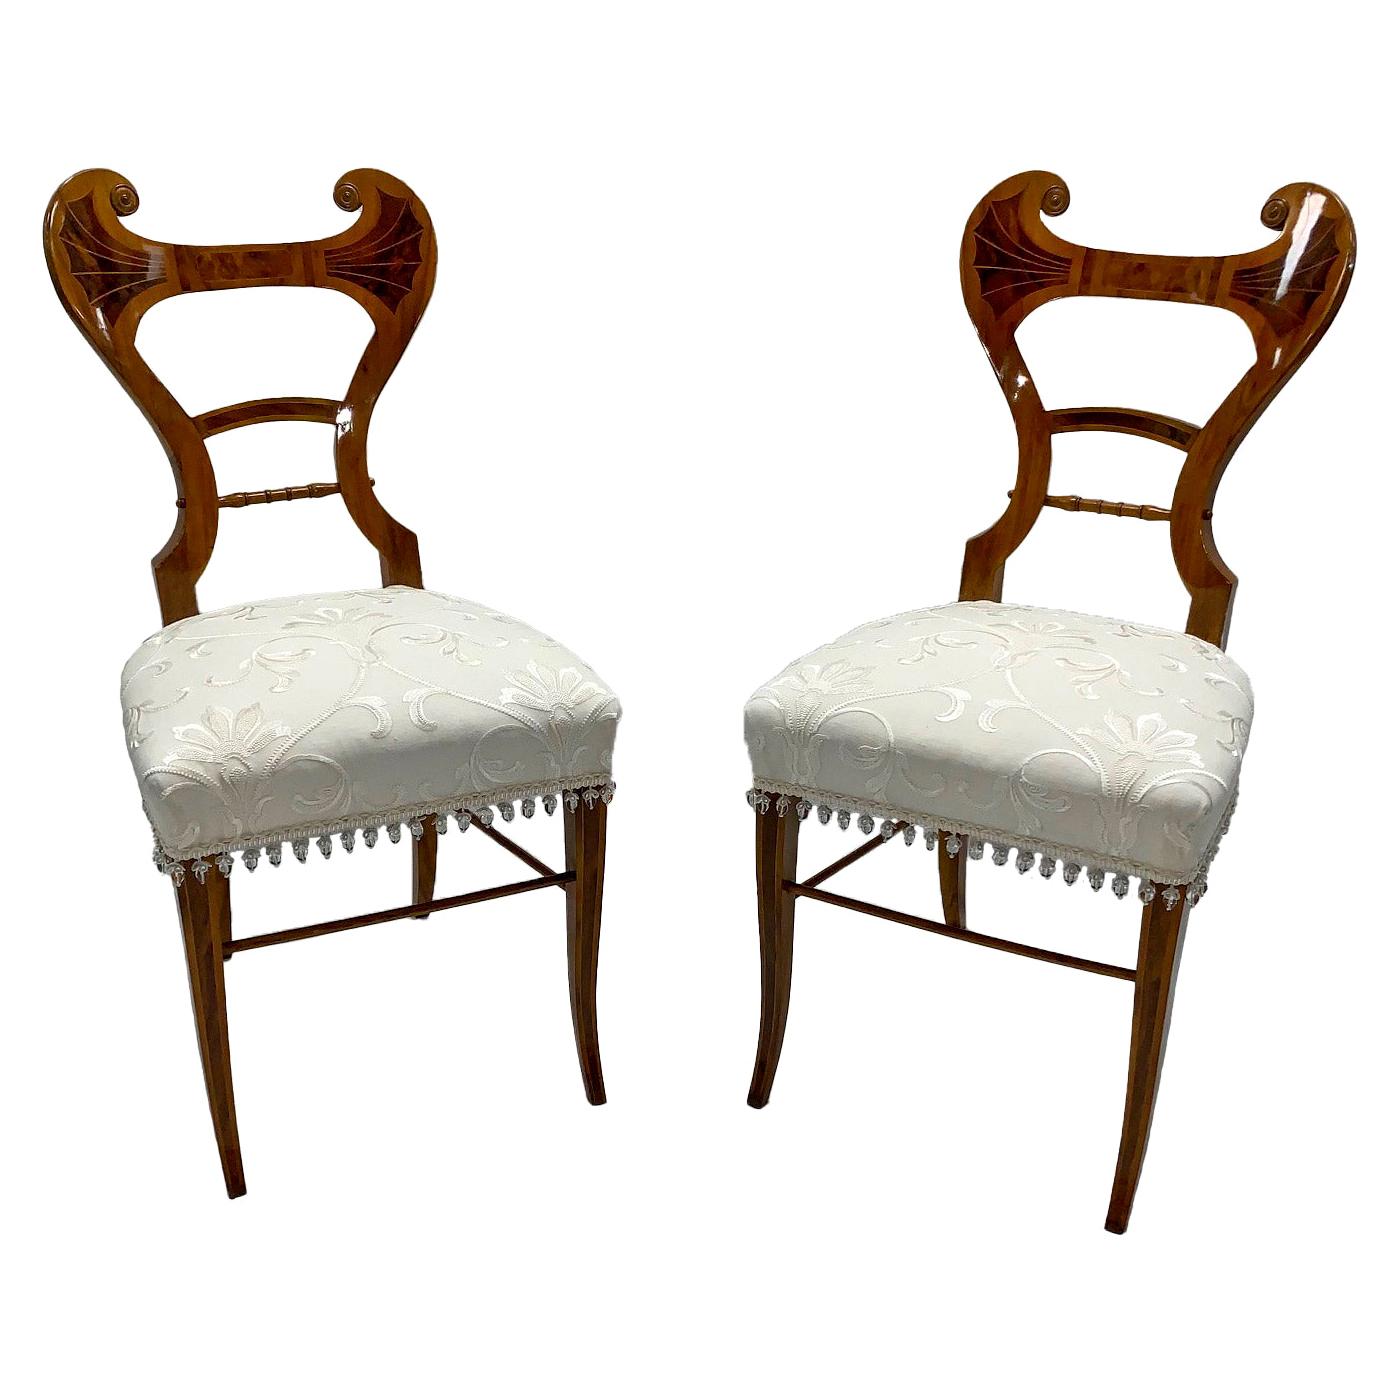 Early 19th Century Neoclassical Biedermeier Side Chairs with Walnut Inlay, Pair For Sale